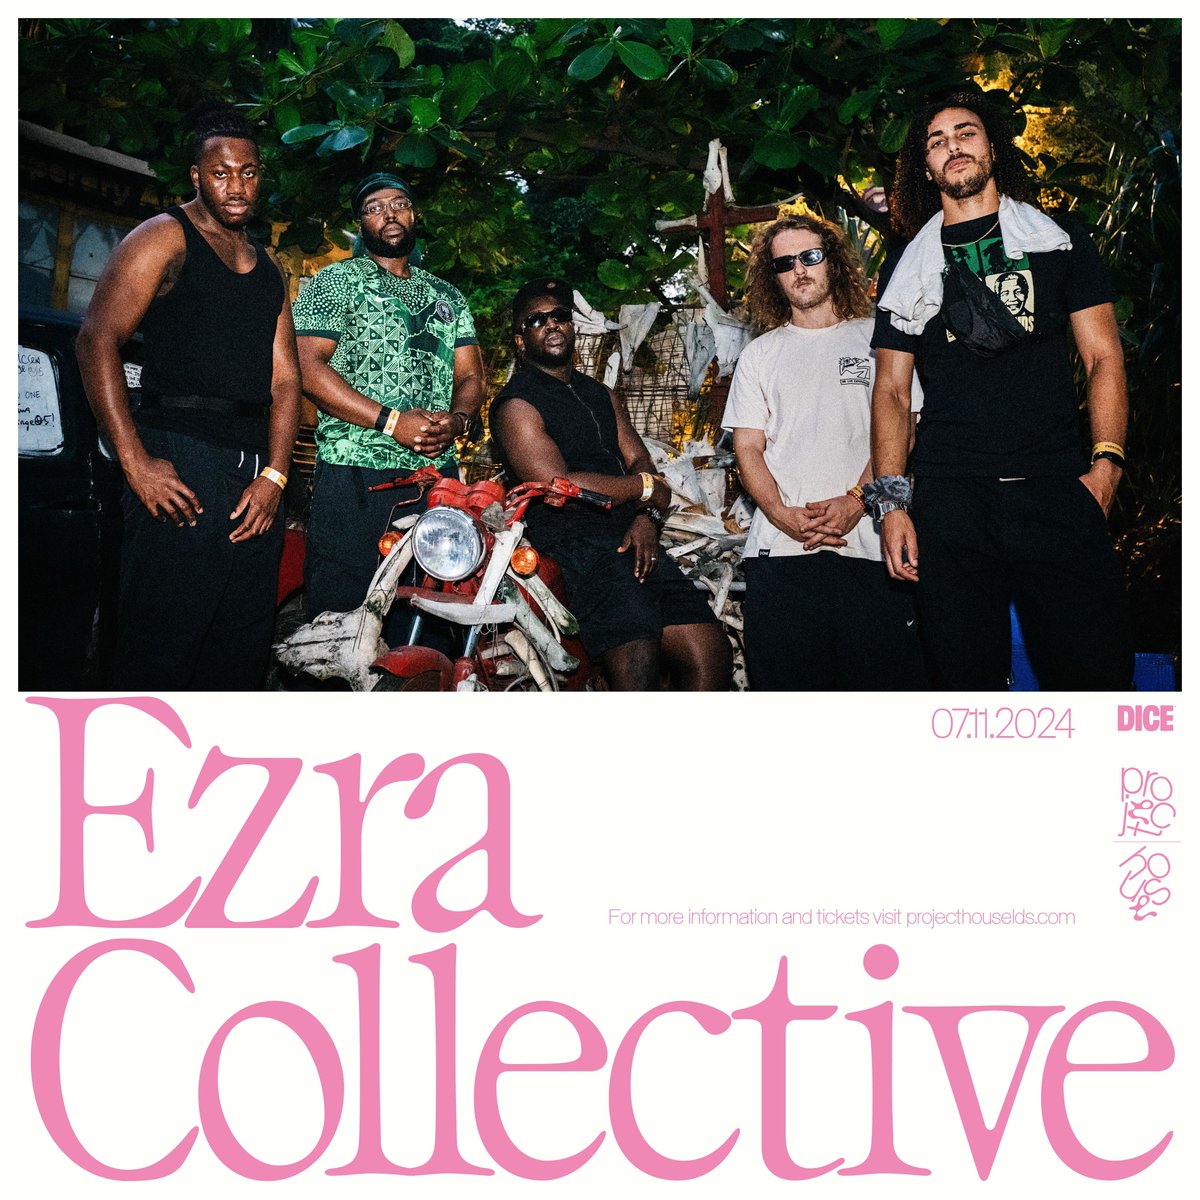 New show: @superfriendzlds and @AEG_Presents bring @ezracollective to Project House, 07.11. Tickets on sale 03.05. Head to @dicefm to set a reminder now! link.dice.fm/Pf145bc8c843